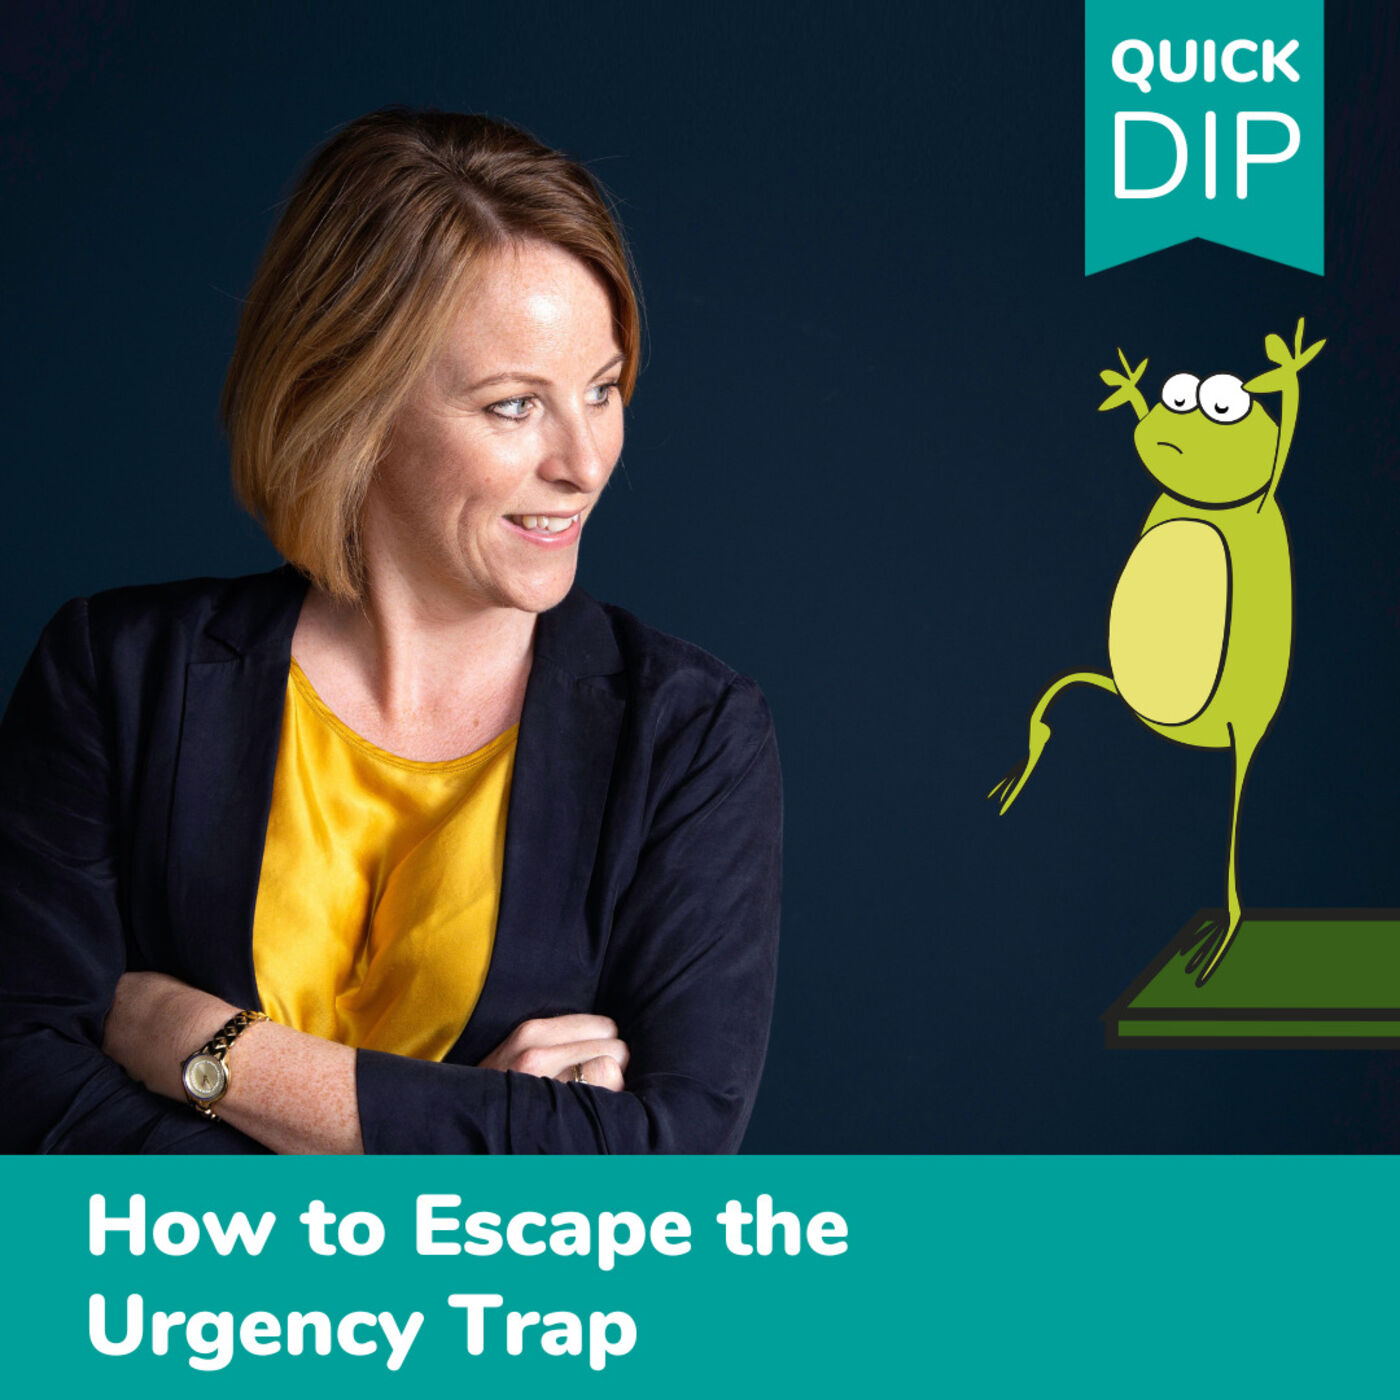 How to Escape the Urgency Trap